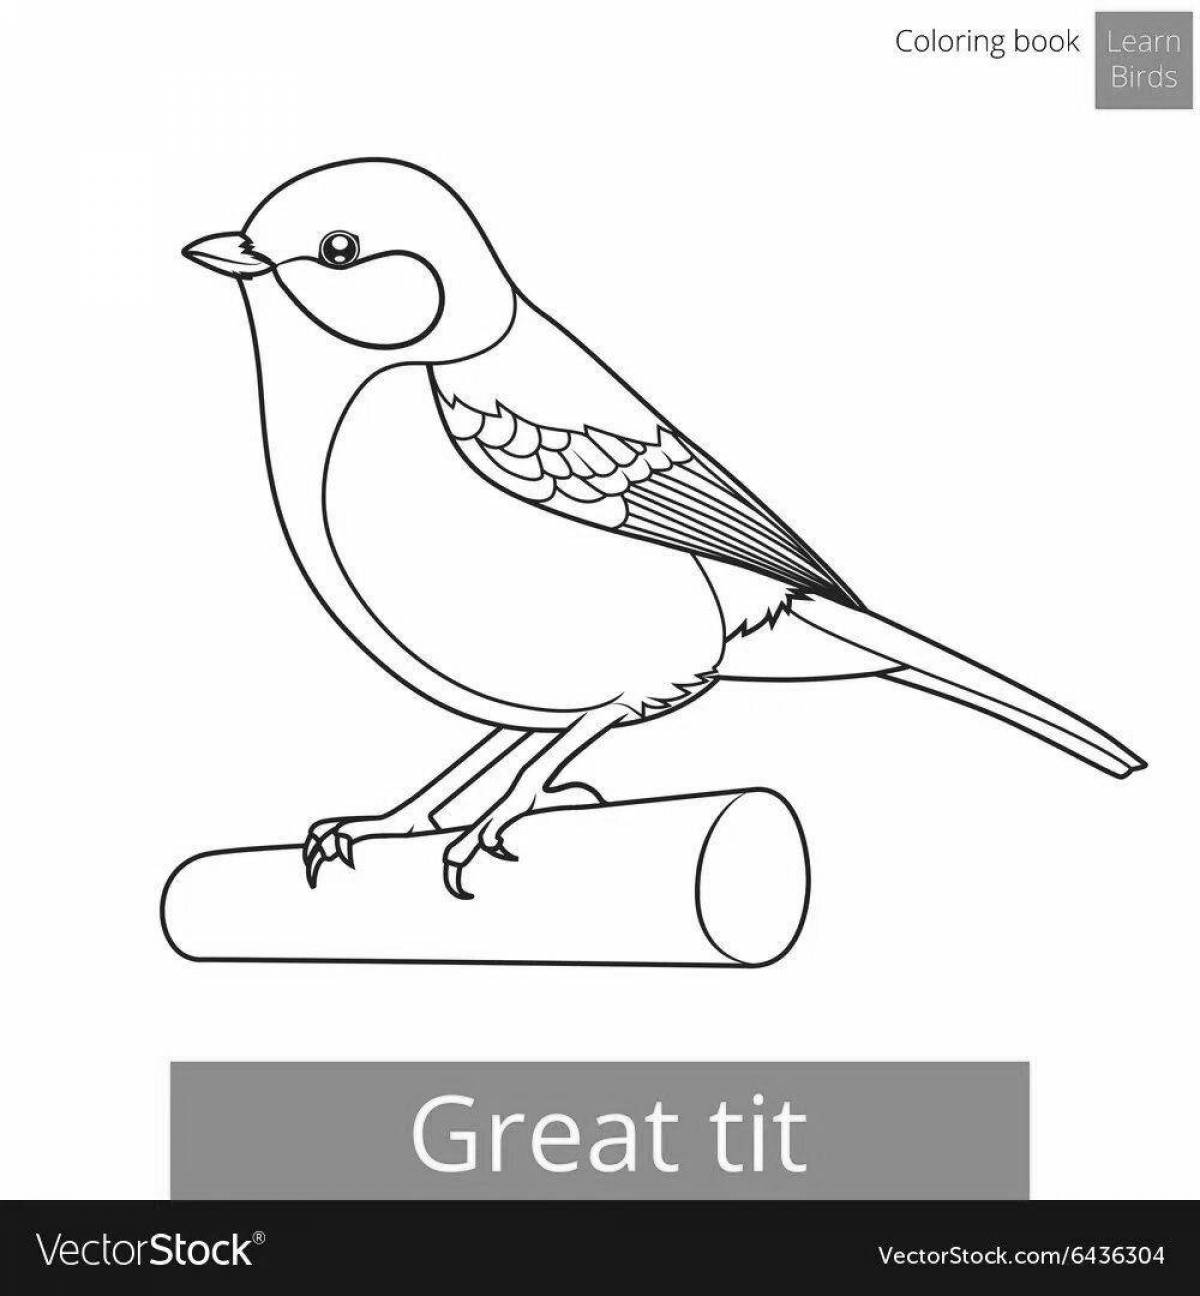 Sunny Tit coloring page for kids